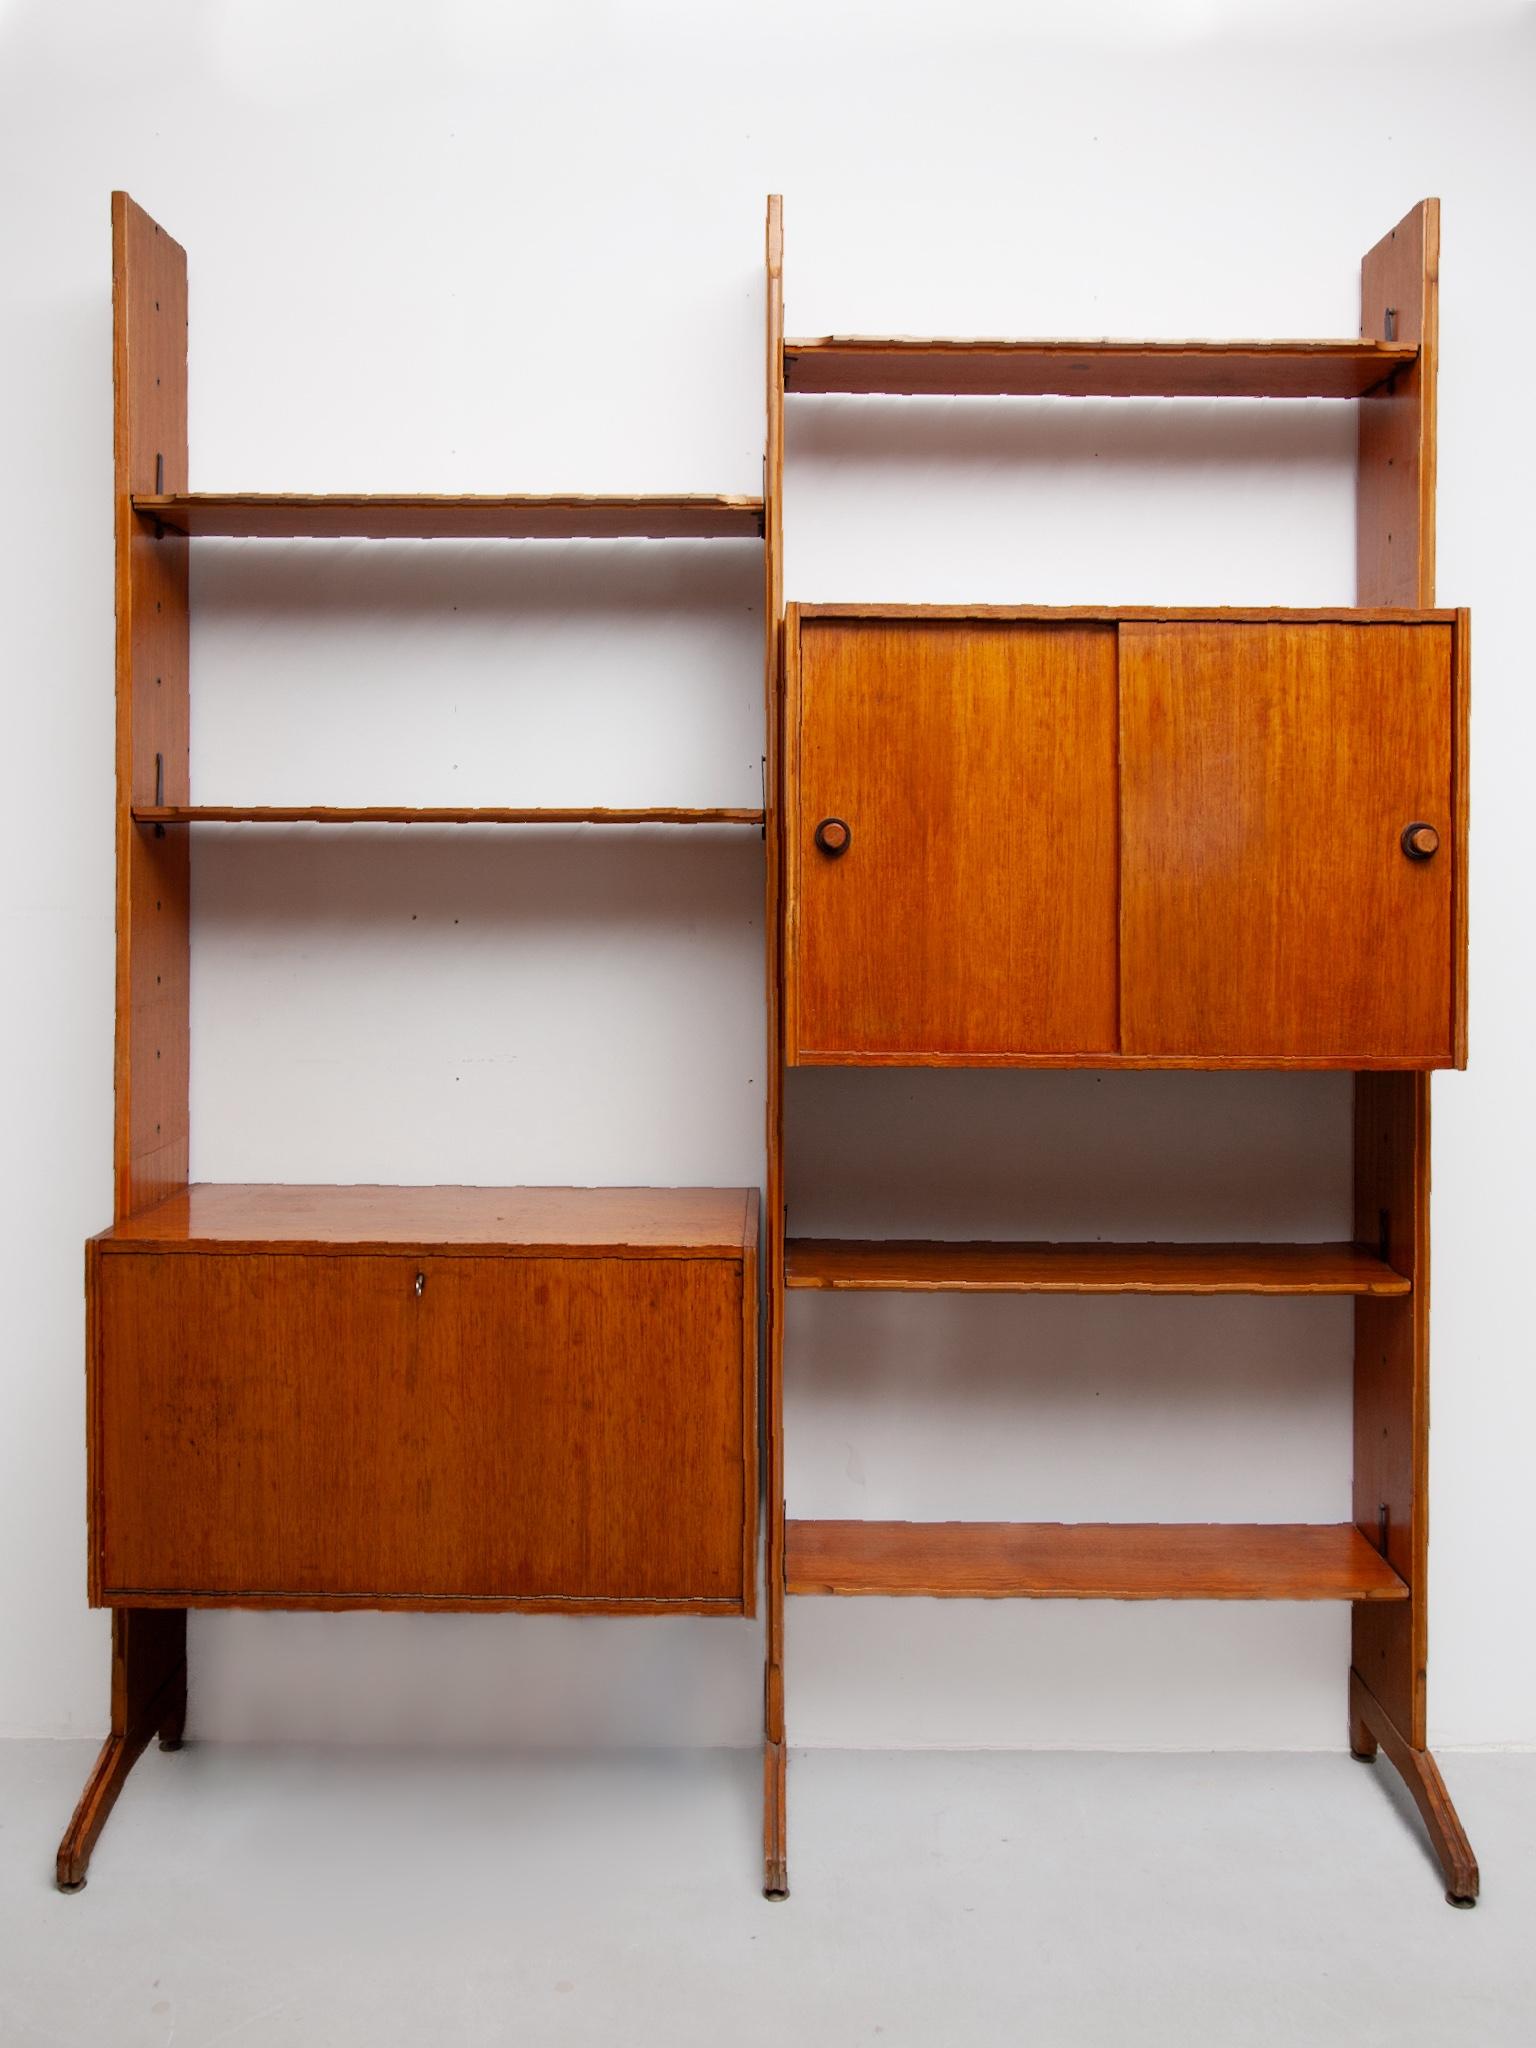 Rare Scandinavian vintage wall-mounted bookcase in original good vintage condition.
Beautiful, high quality modular wall shelf from the 1950s is made of teak with two wall mounted strips. The Danish shelving system, consisting of two modular wall